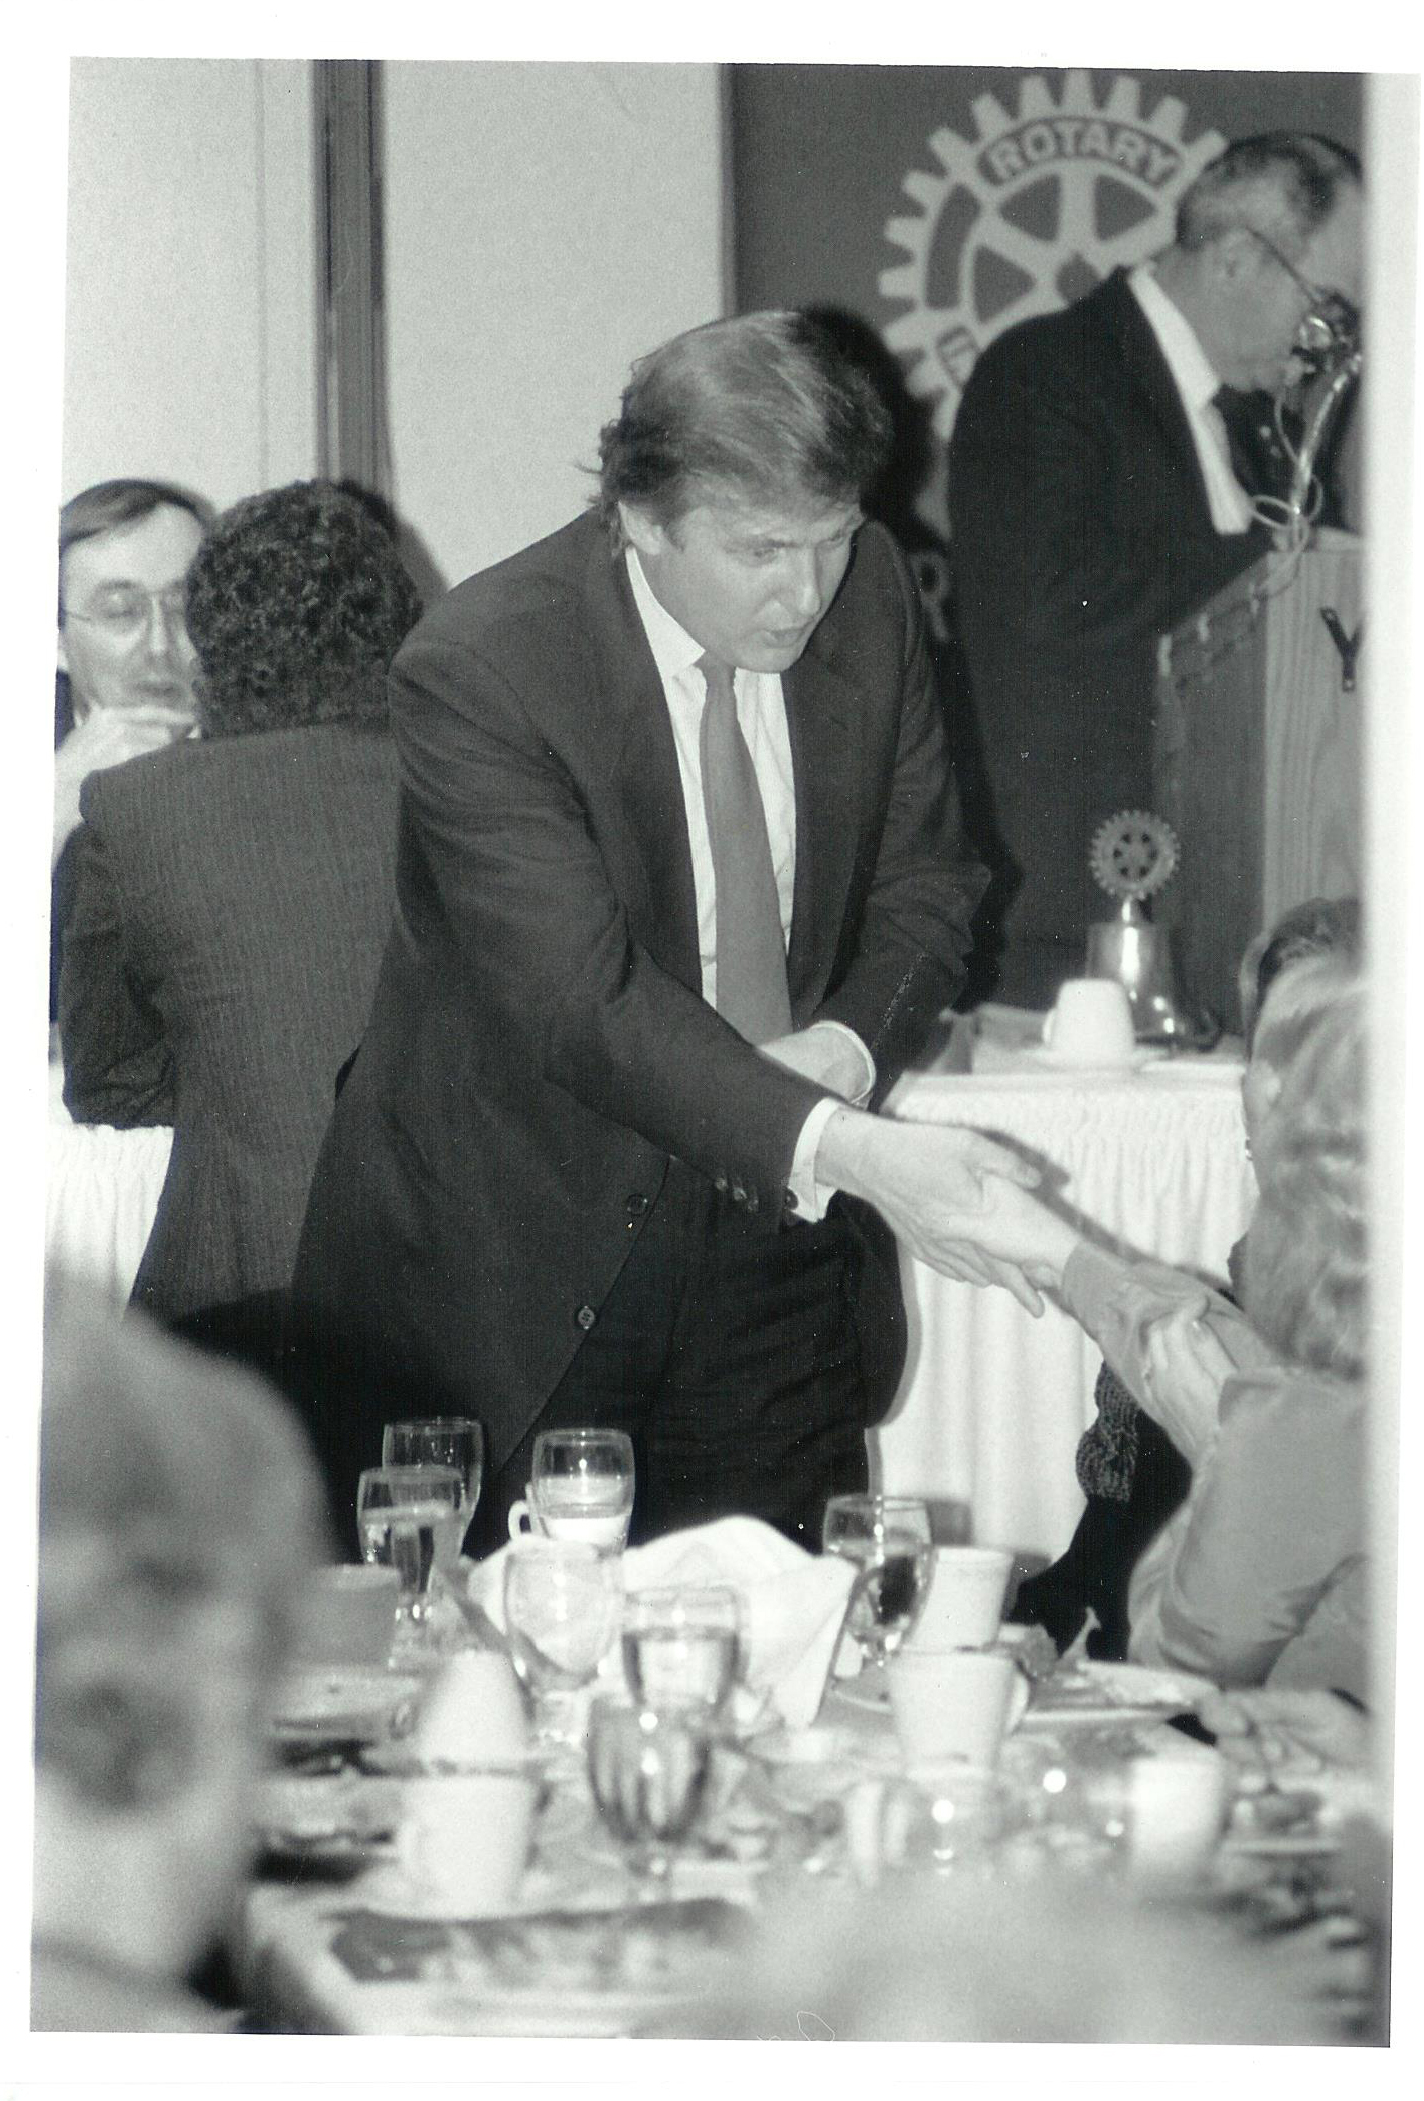 Donald Trump talks to people attending his address to the Rotary Club in Portsmouth, N.H., on Oct. 22, 1987. (Courtesy of Mike Dunbar)